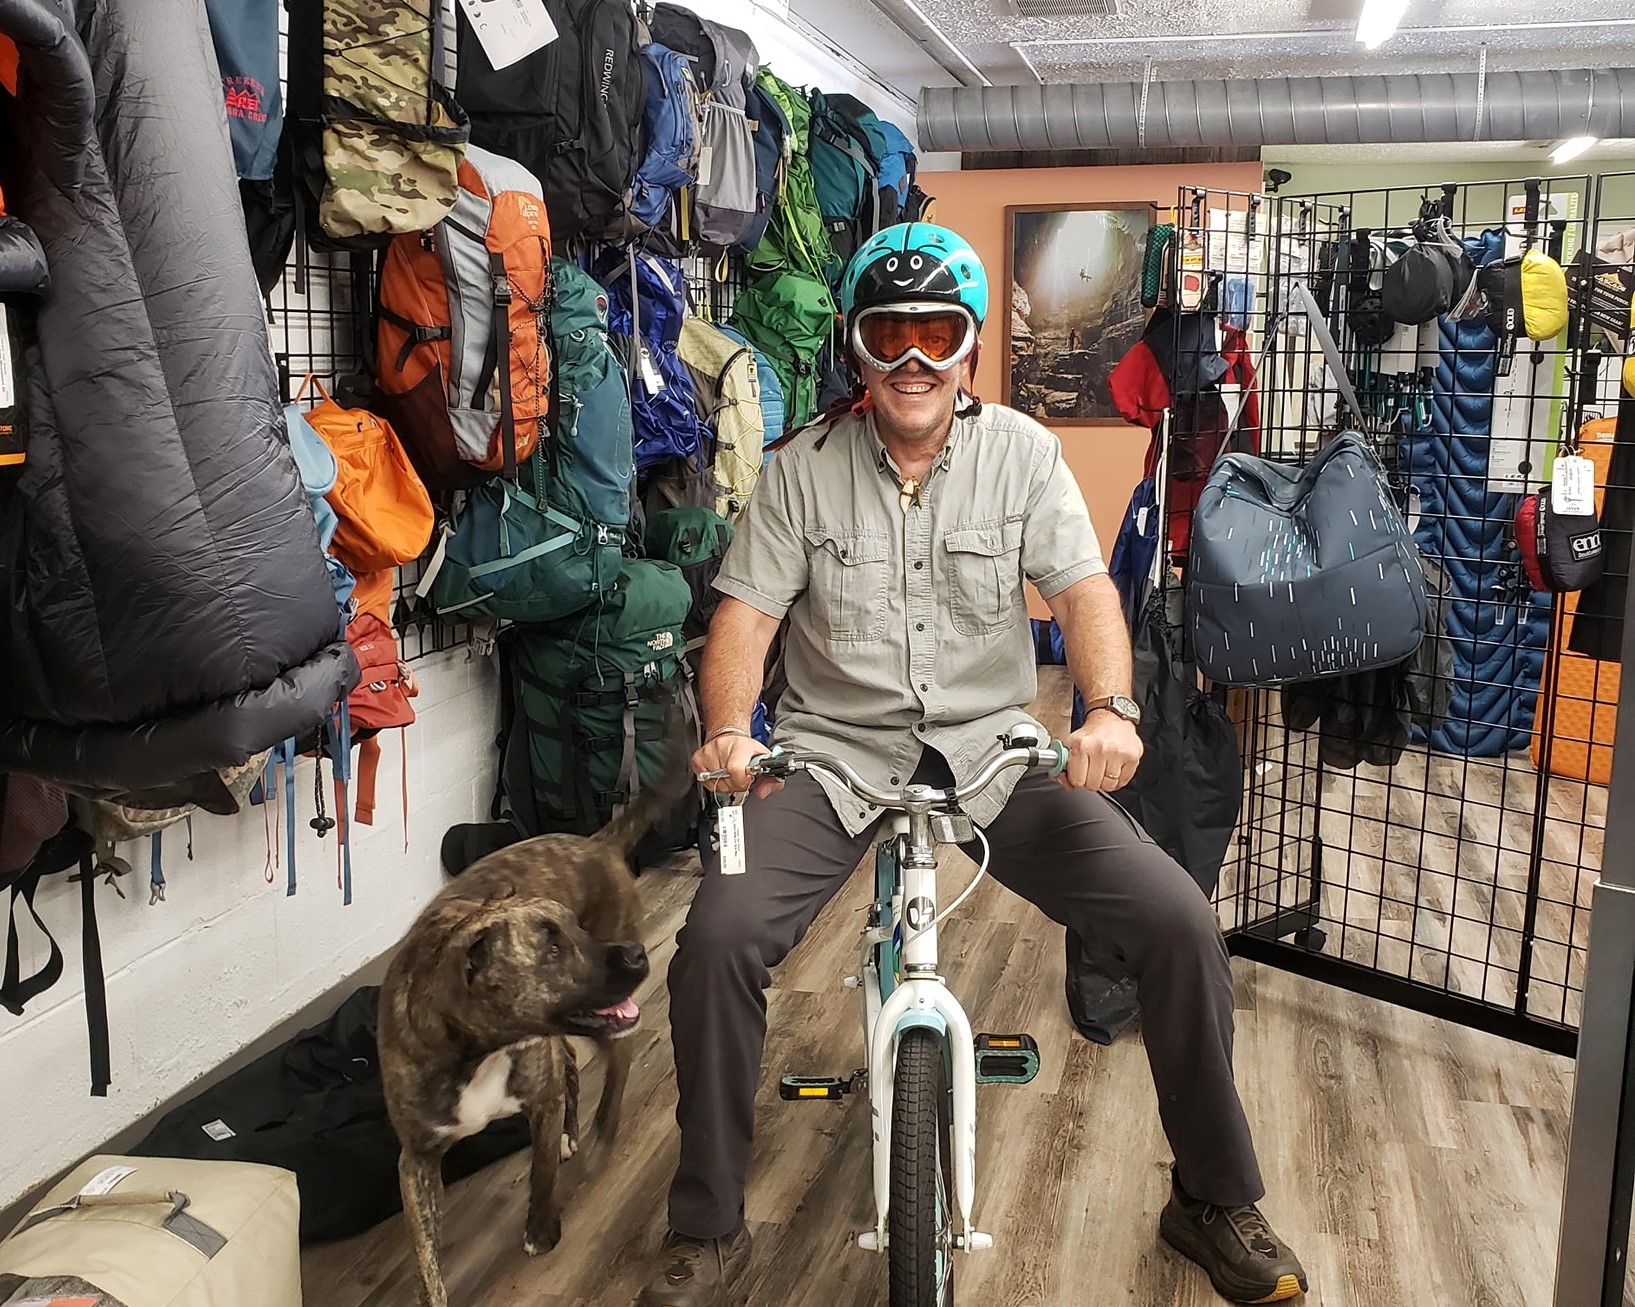 https://assets.simpleviewinc.com/simpleview/image/upload/crm/knoxville/Bike-with-Dog_114690BB-5056-BF65-D6CA8472D76E43C0-11468e6d5056bf6_11469940-5056-bf65-d6461de92f39b861.jpg